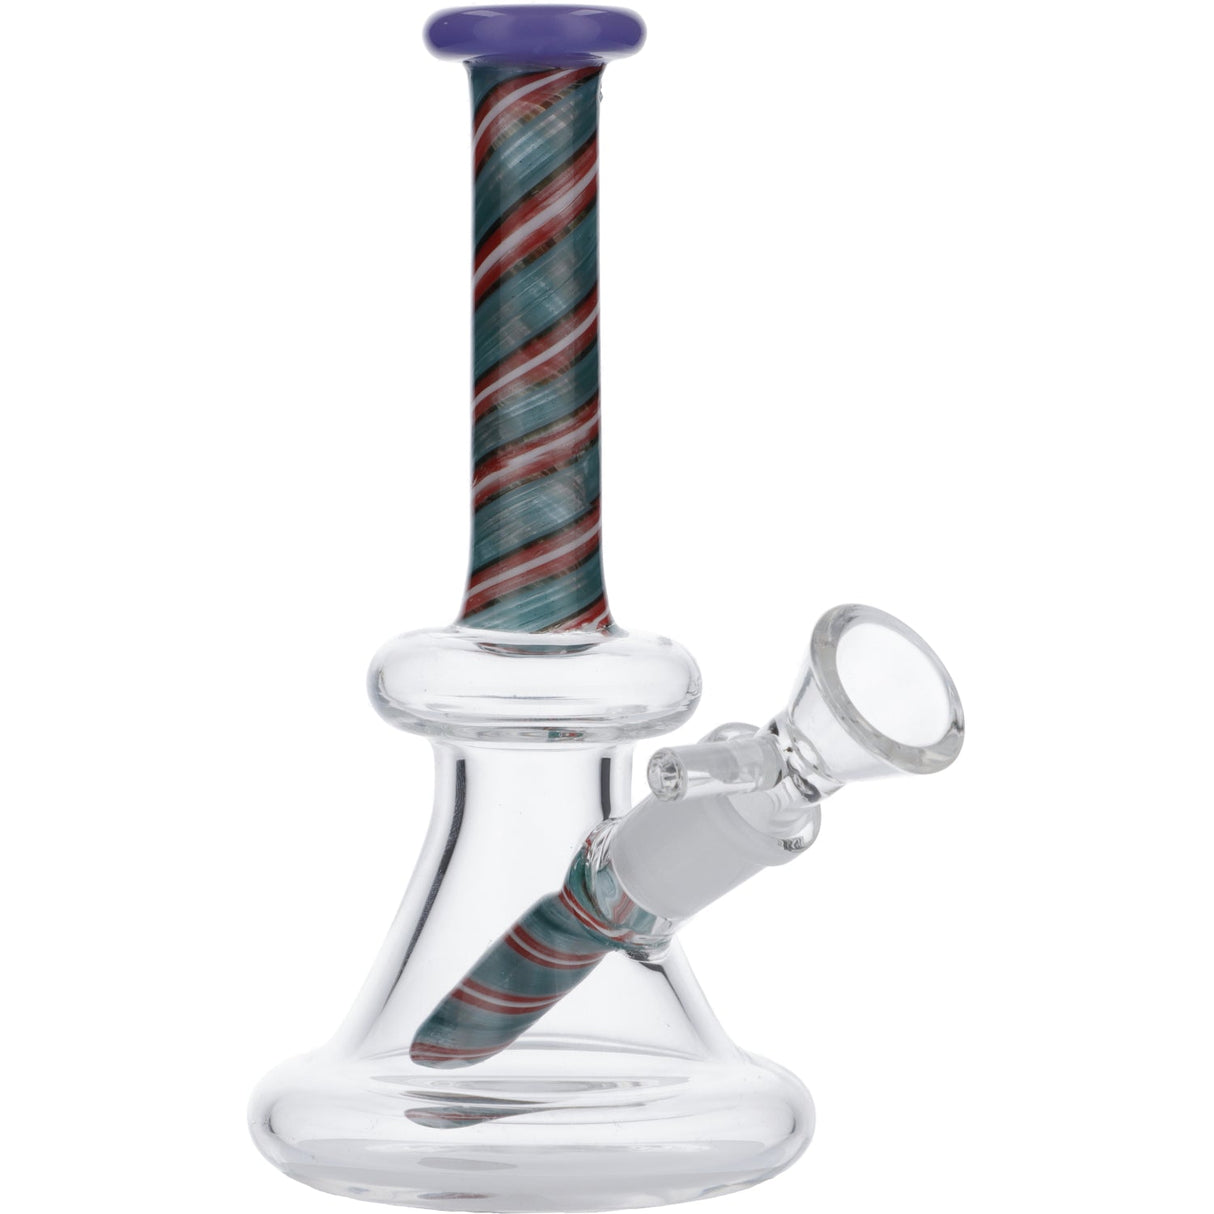 Colorful Spiral Mini Bong by Valiant Distribution, 6" Beaker Design, Front View on White Background